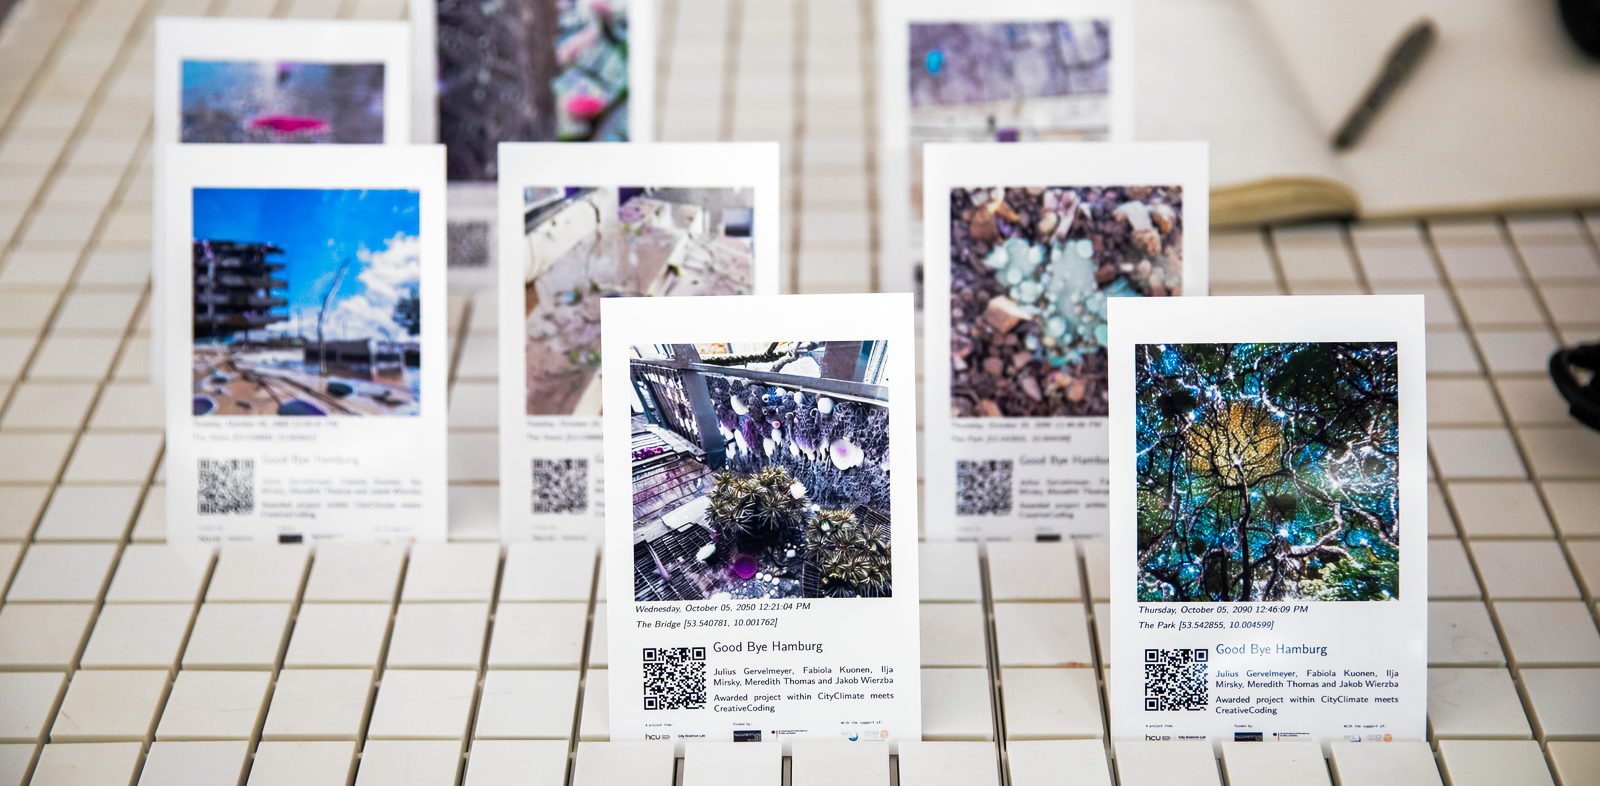 photo: polaroid-like cards with neurally transformed images, QR codes, and technical information. The transformed pictures look like fantasy/scifi-ish nature.